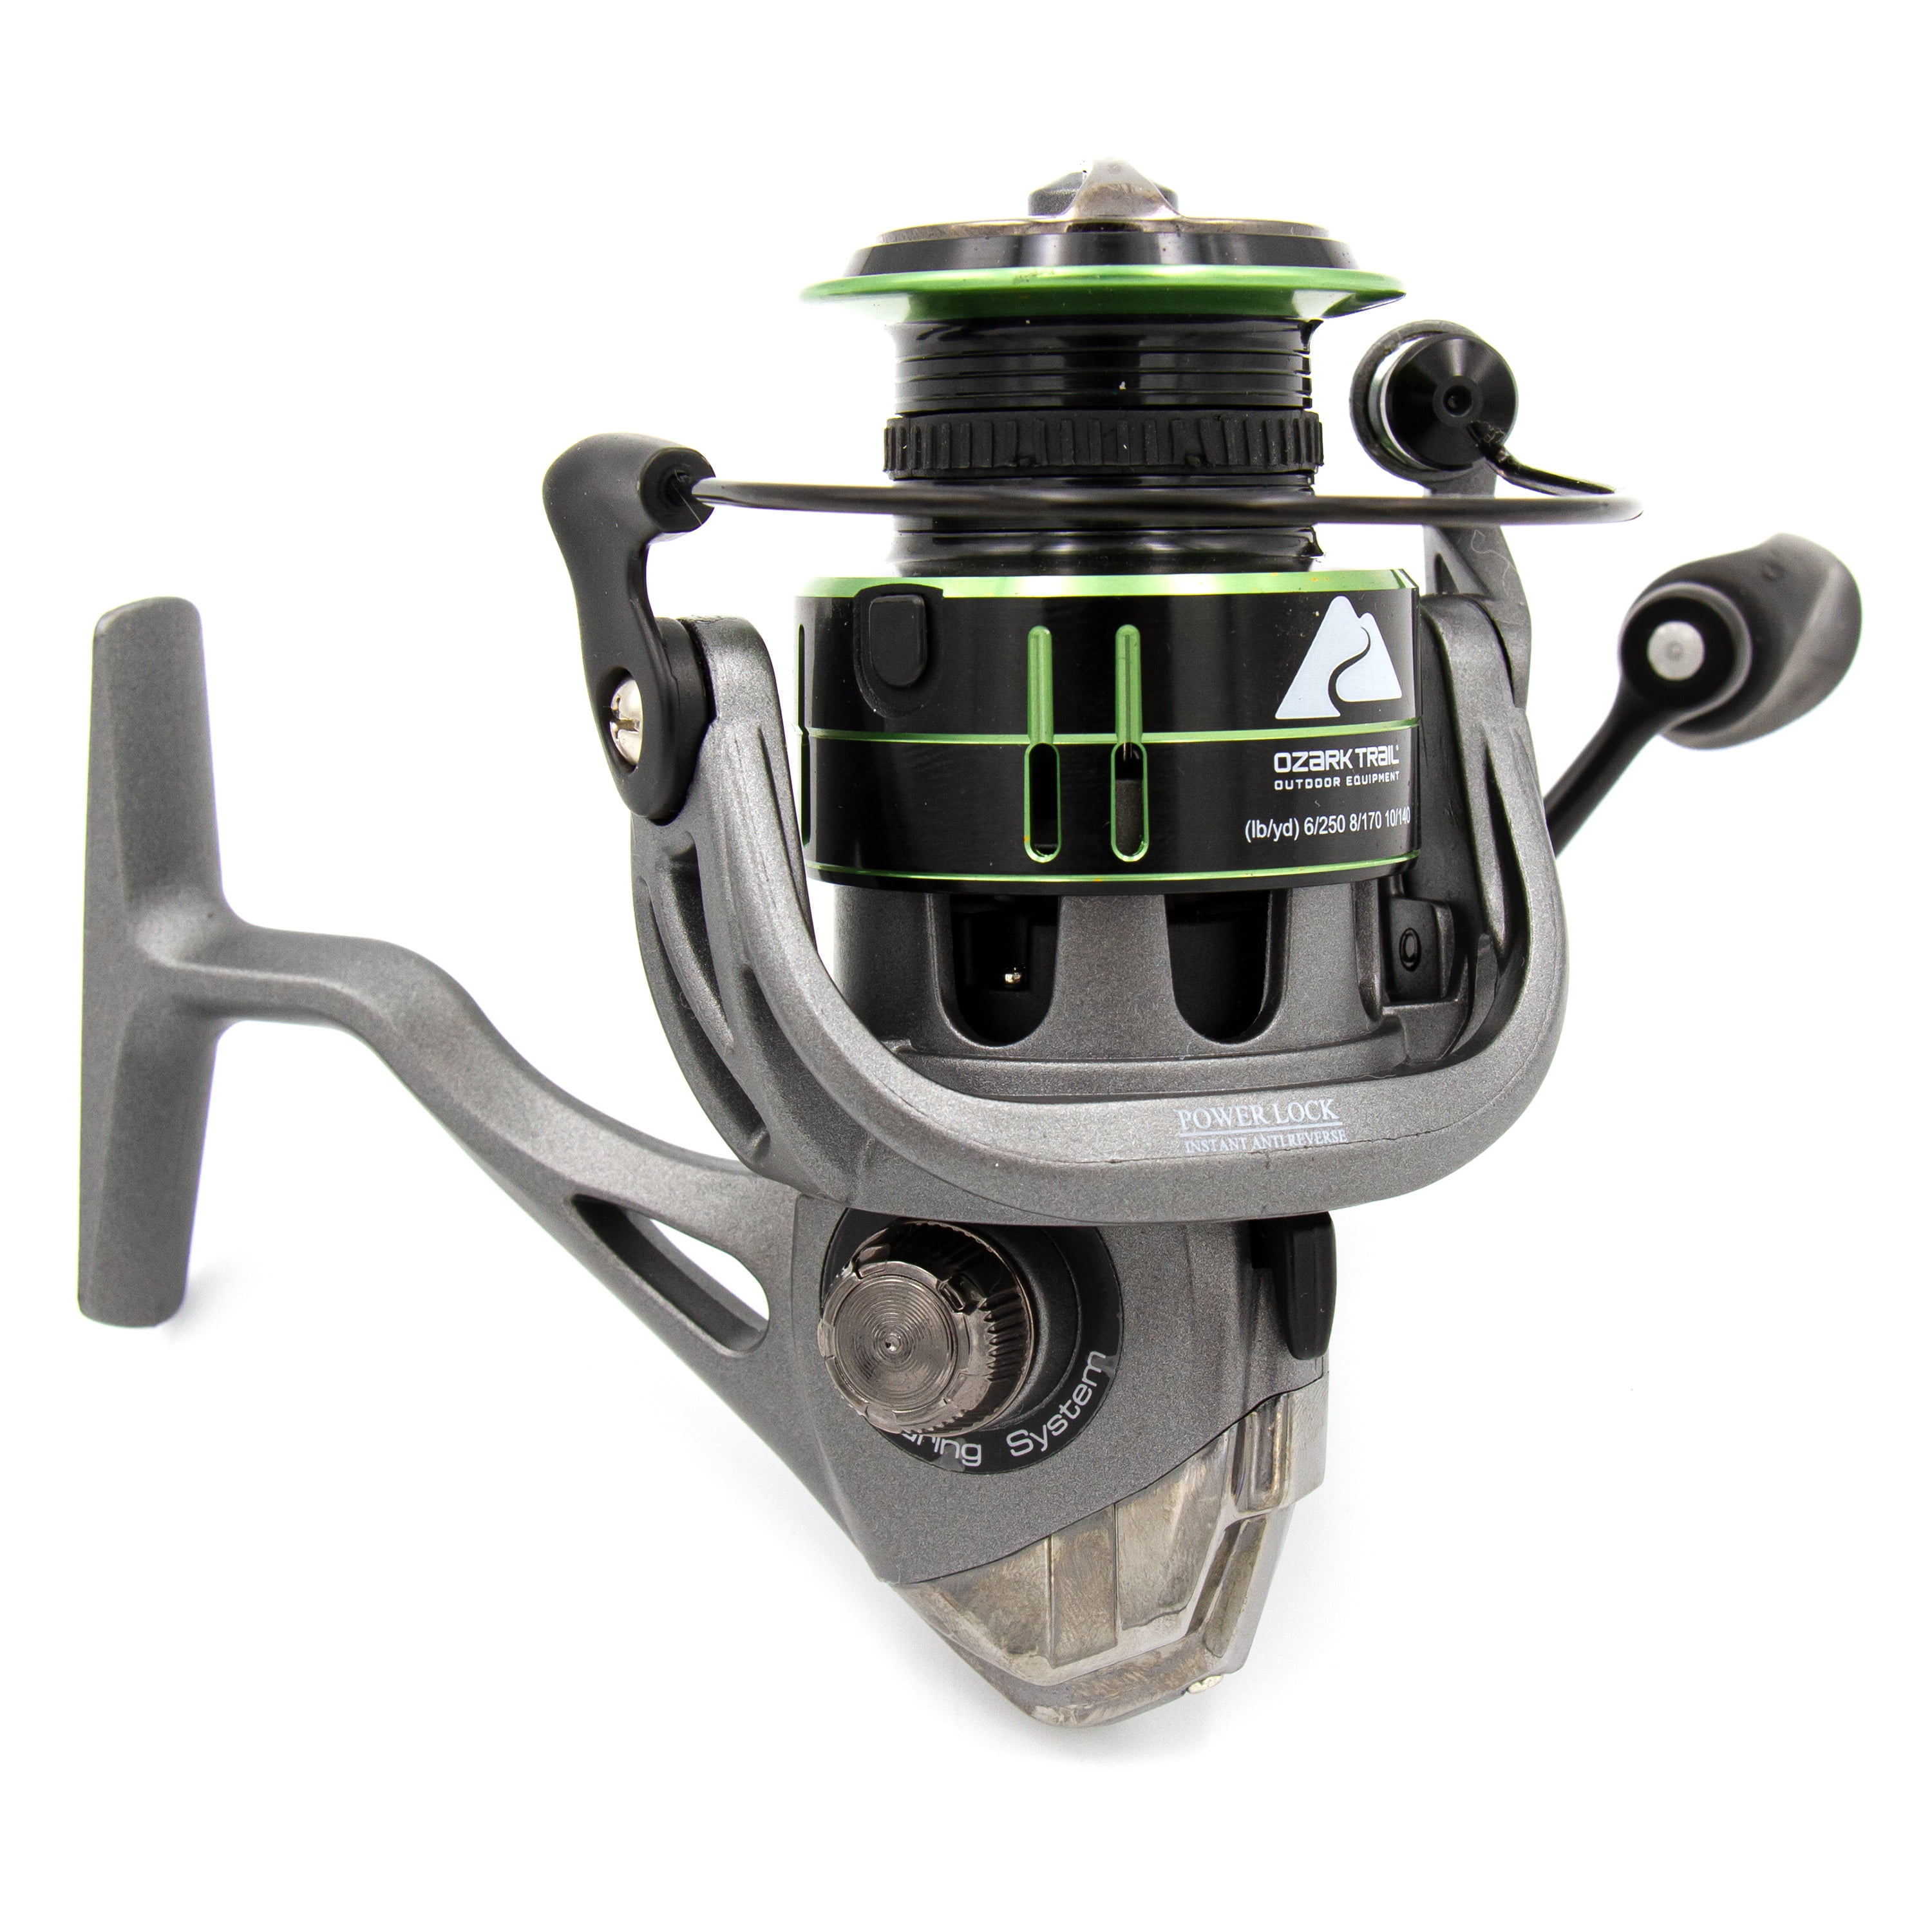 PRO Bass Spinning Fishing Reels Reel for sale